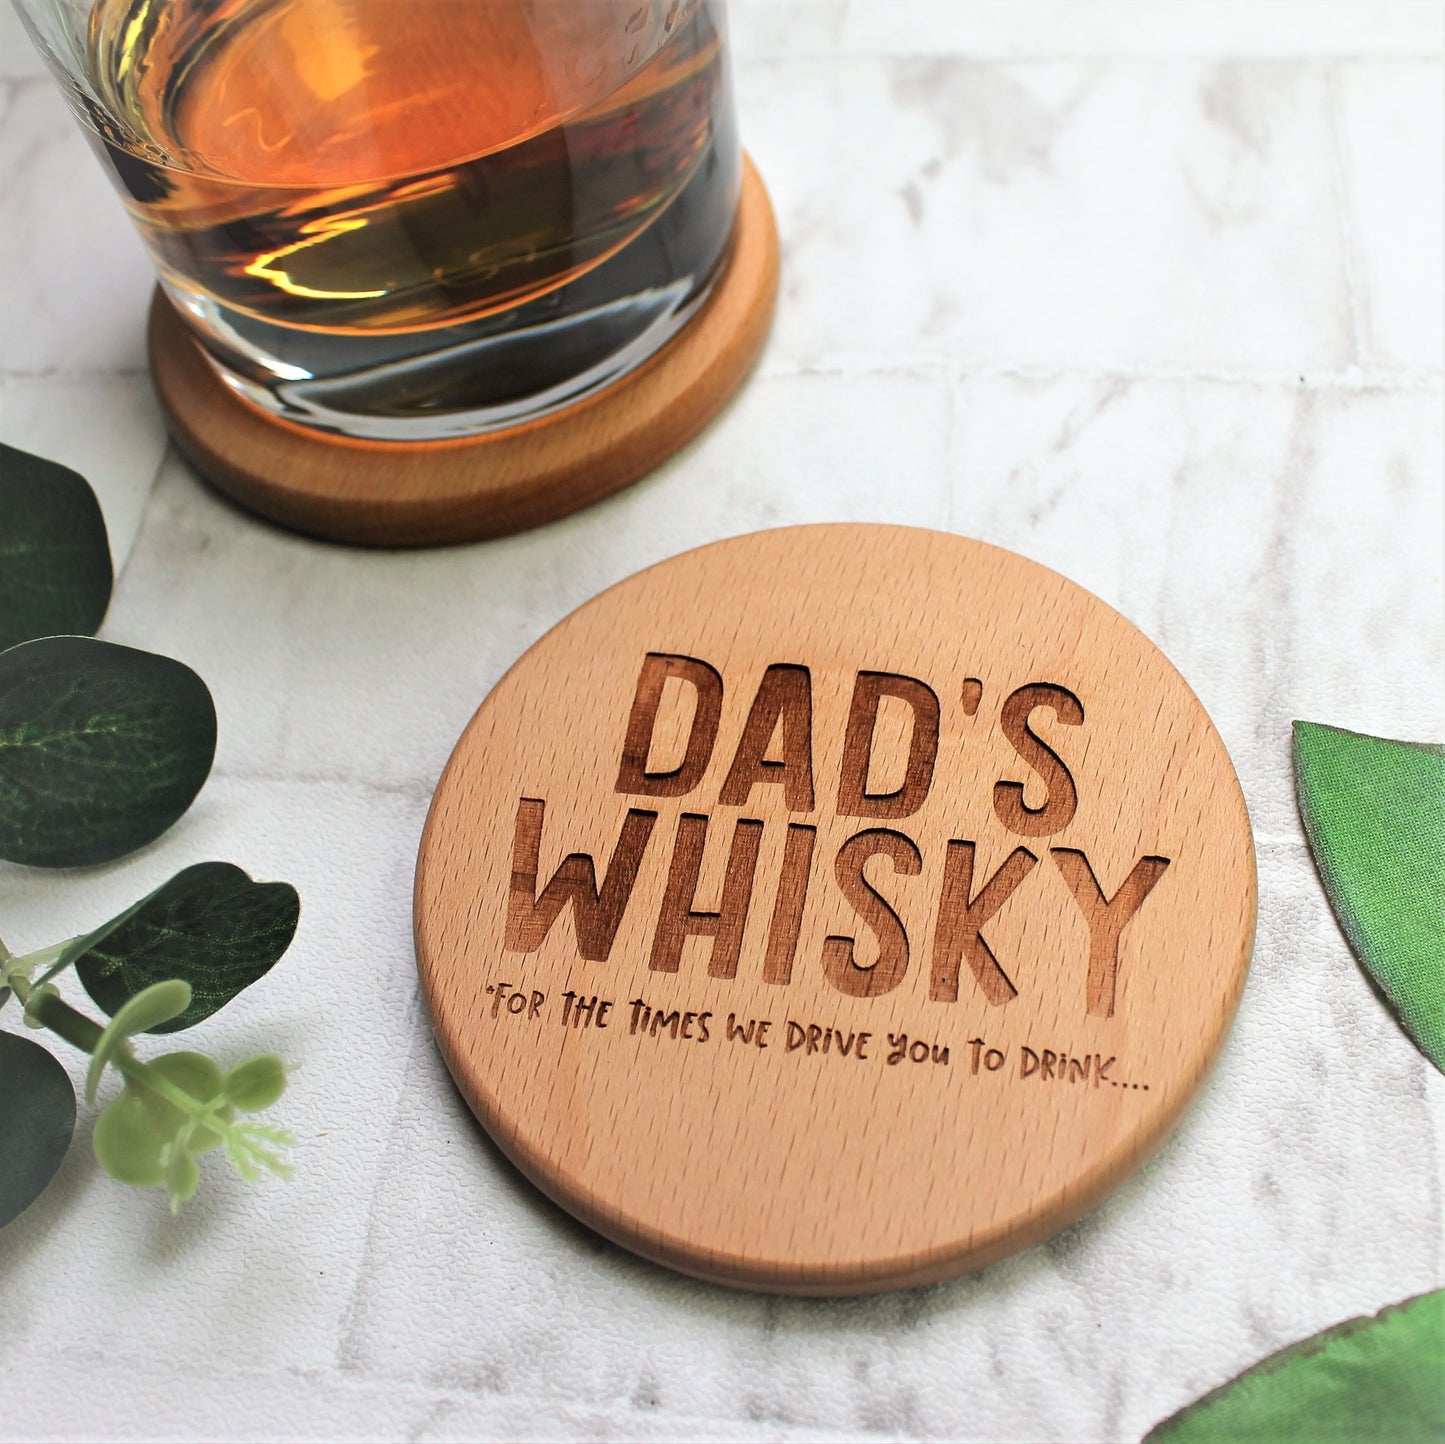 Dad's whisky, engraved round wooden coaster for Dad